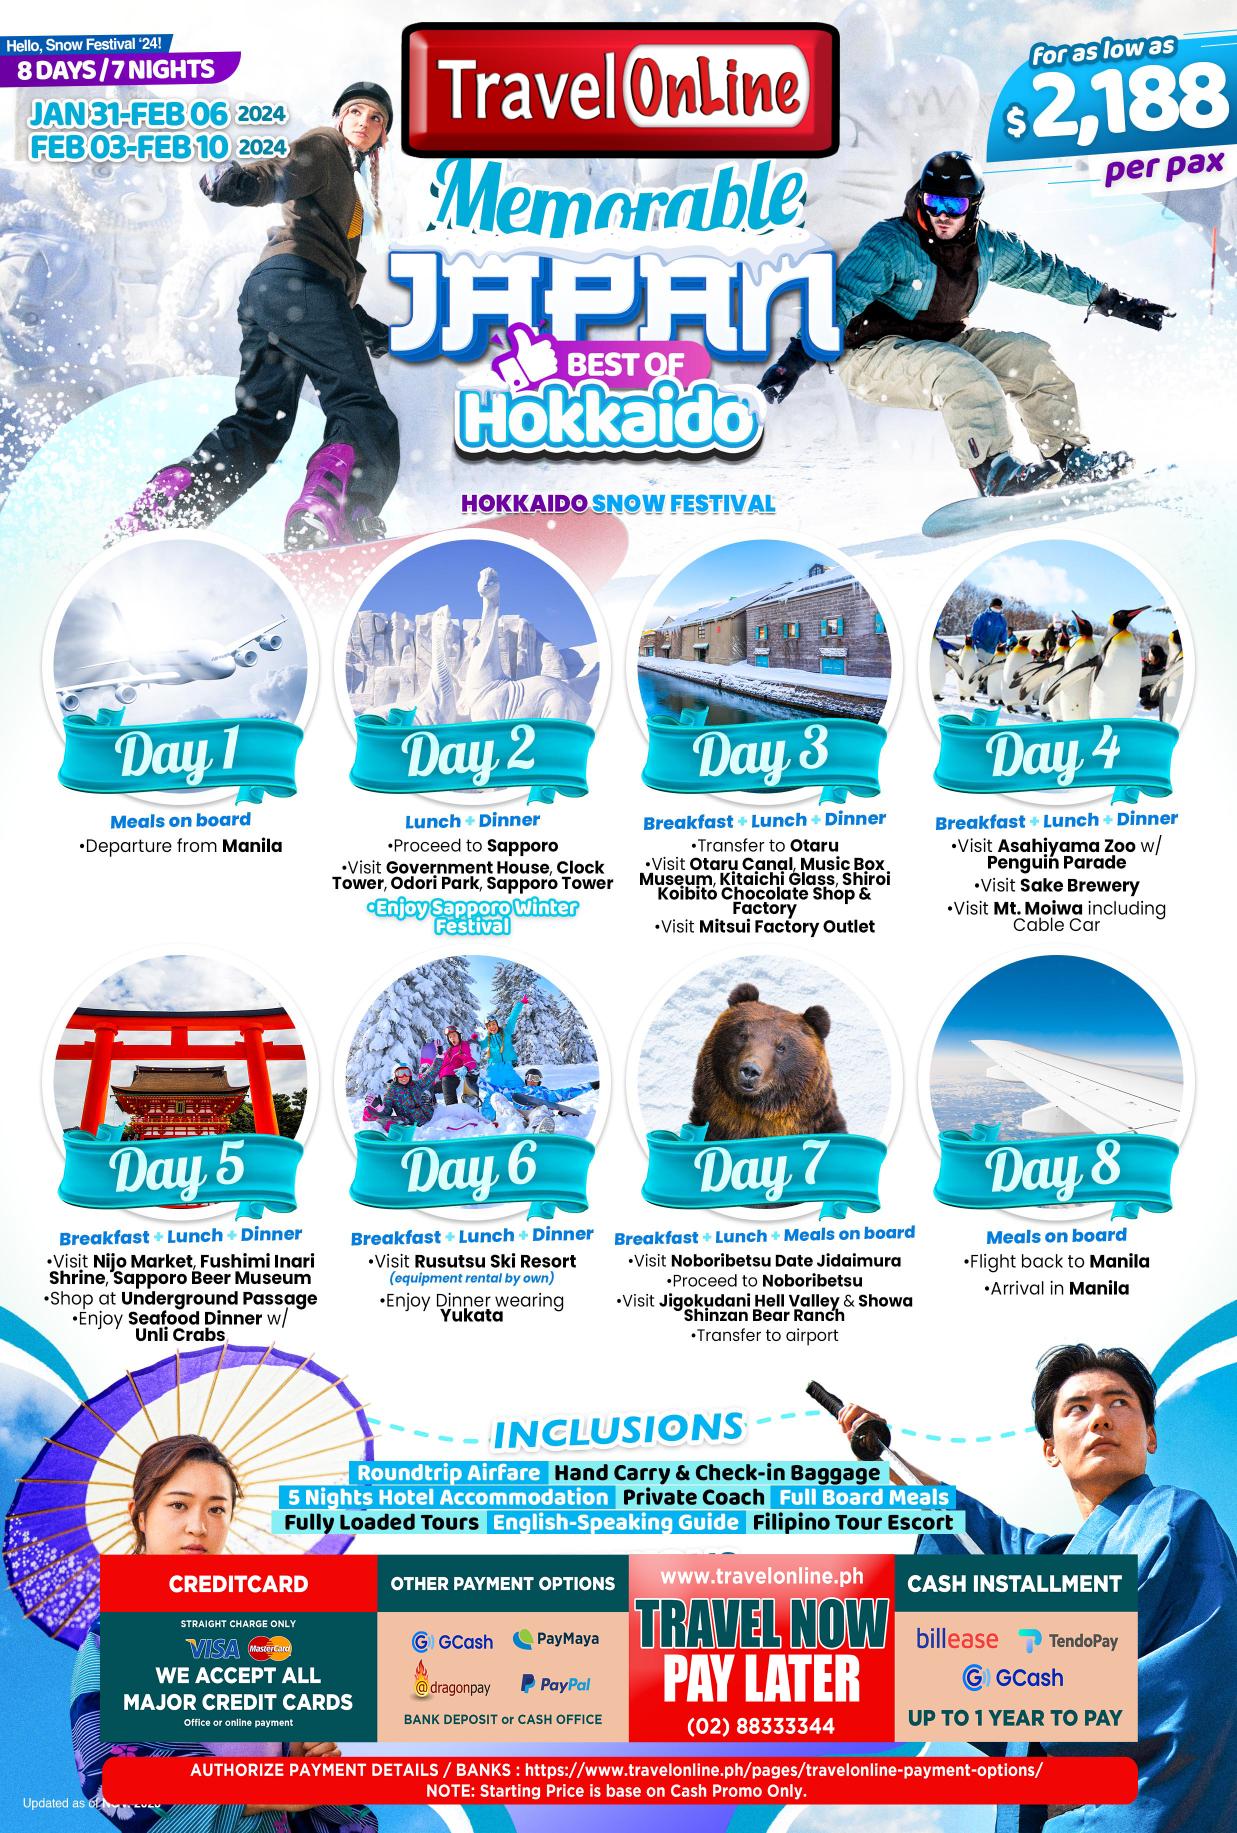 japan tours from philippines